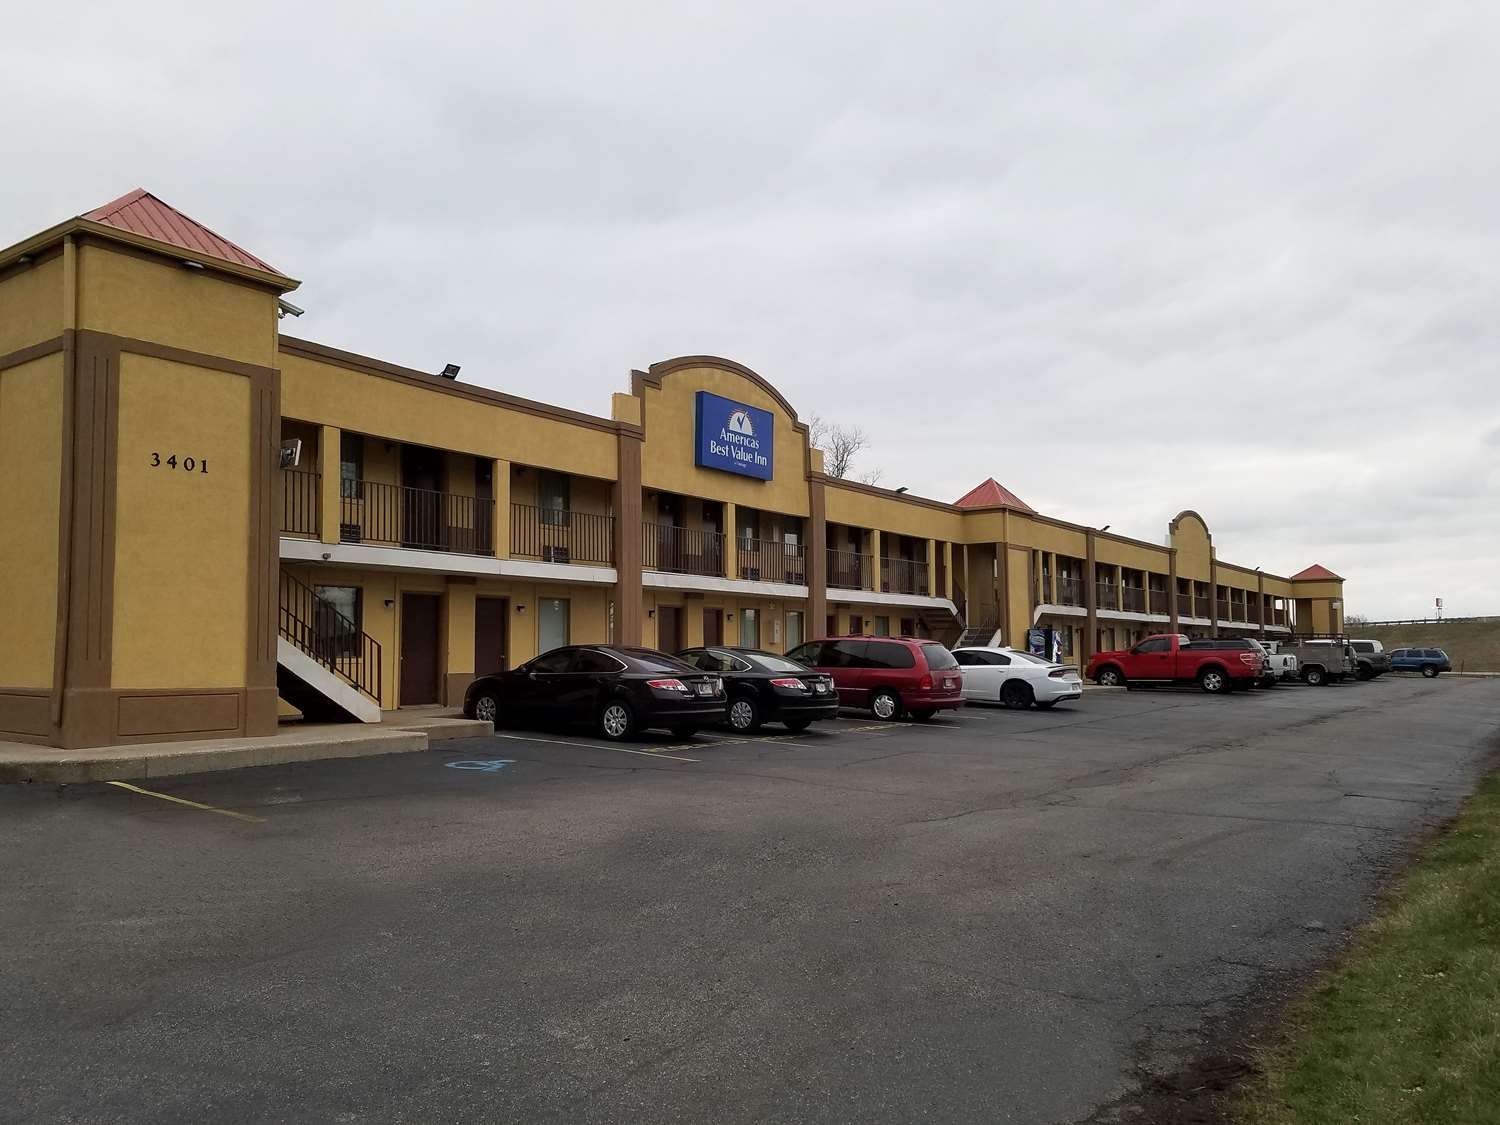 Pet Friendly Americas Best Value Inn-Indy South in Indianapolis, Indiana